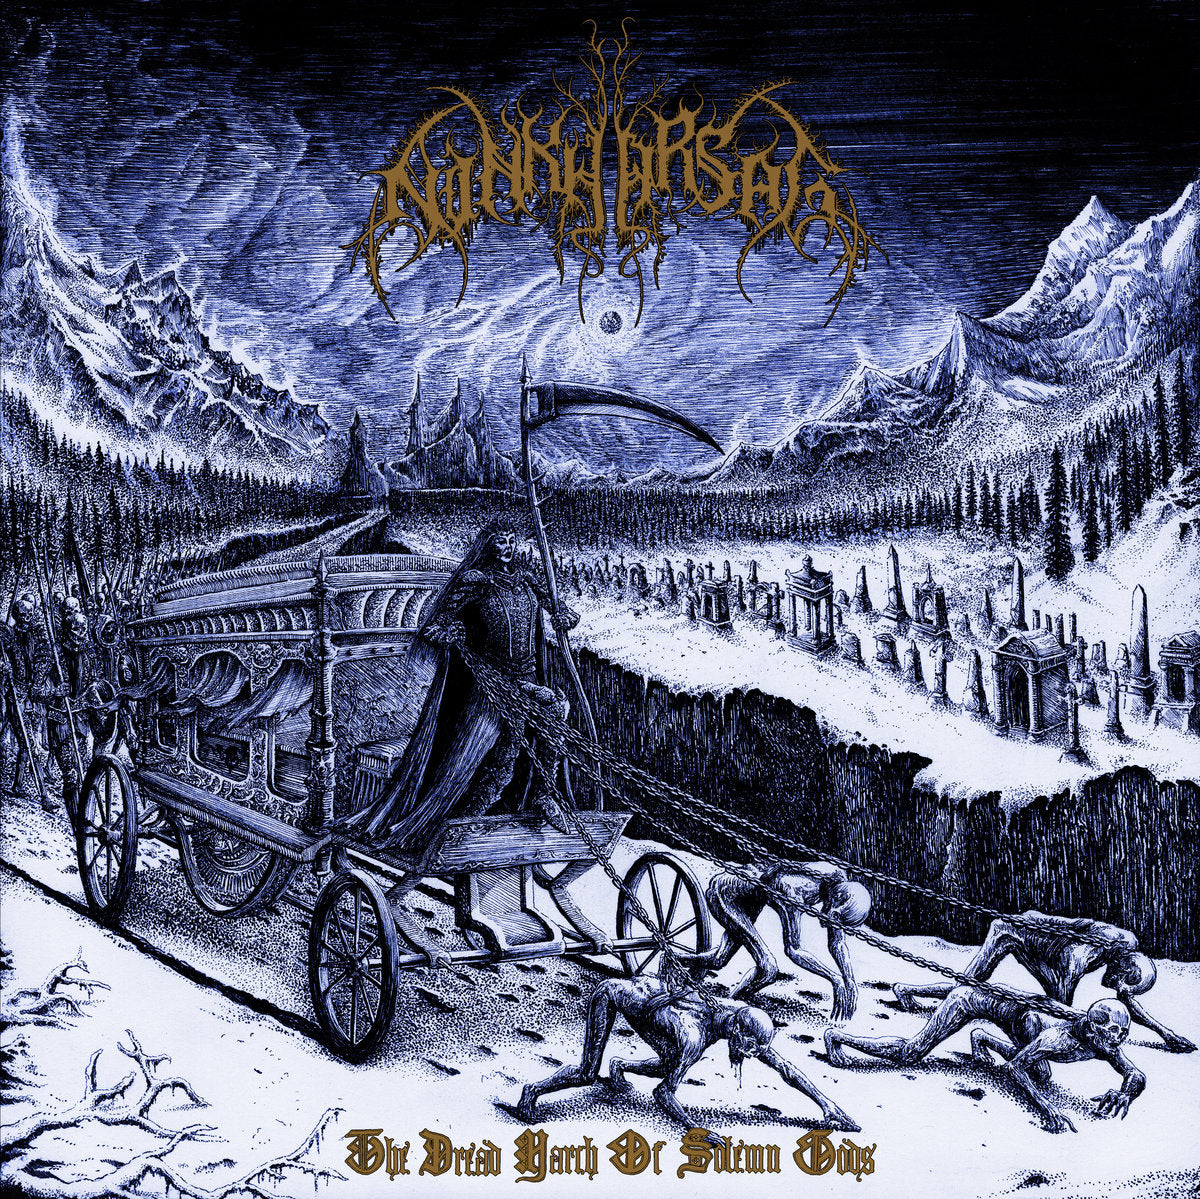 Ninkharsag - The Dread March Of Solemn Gods CD